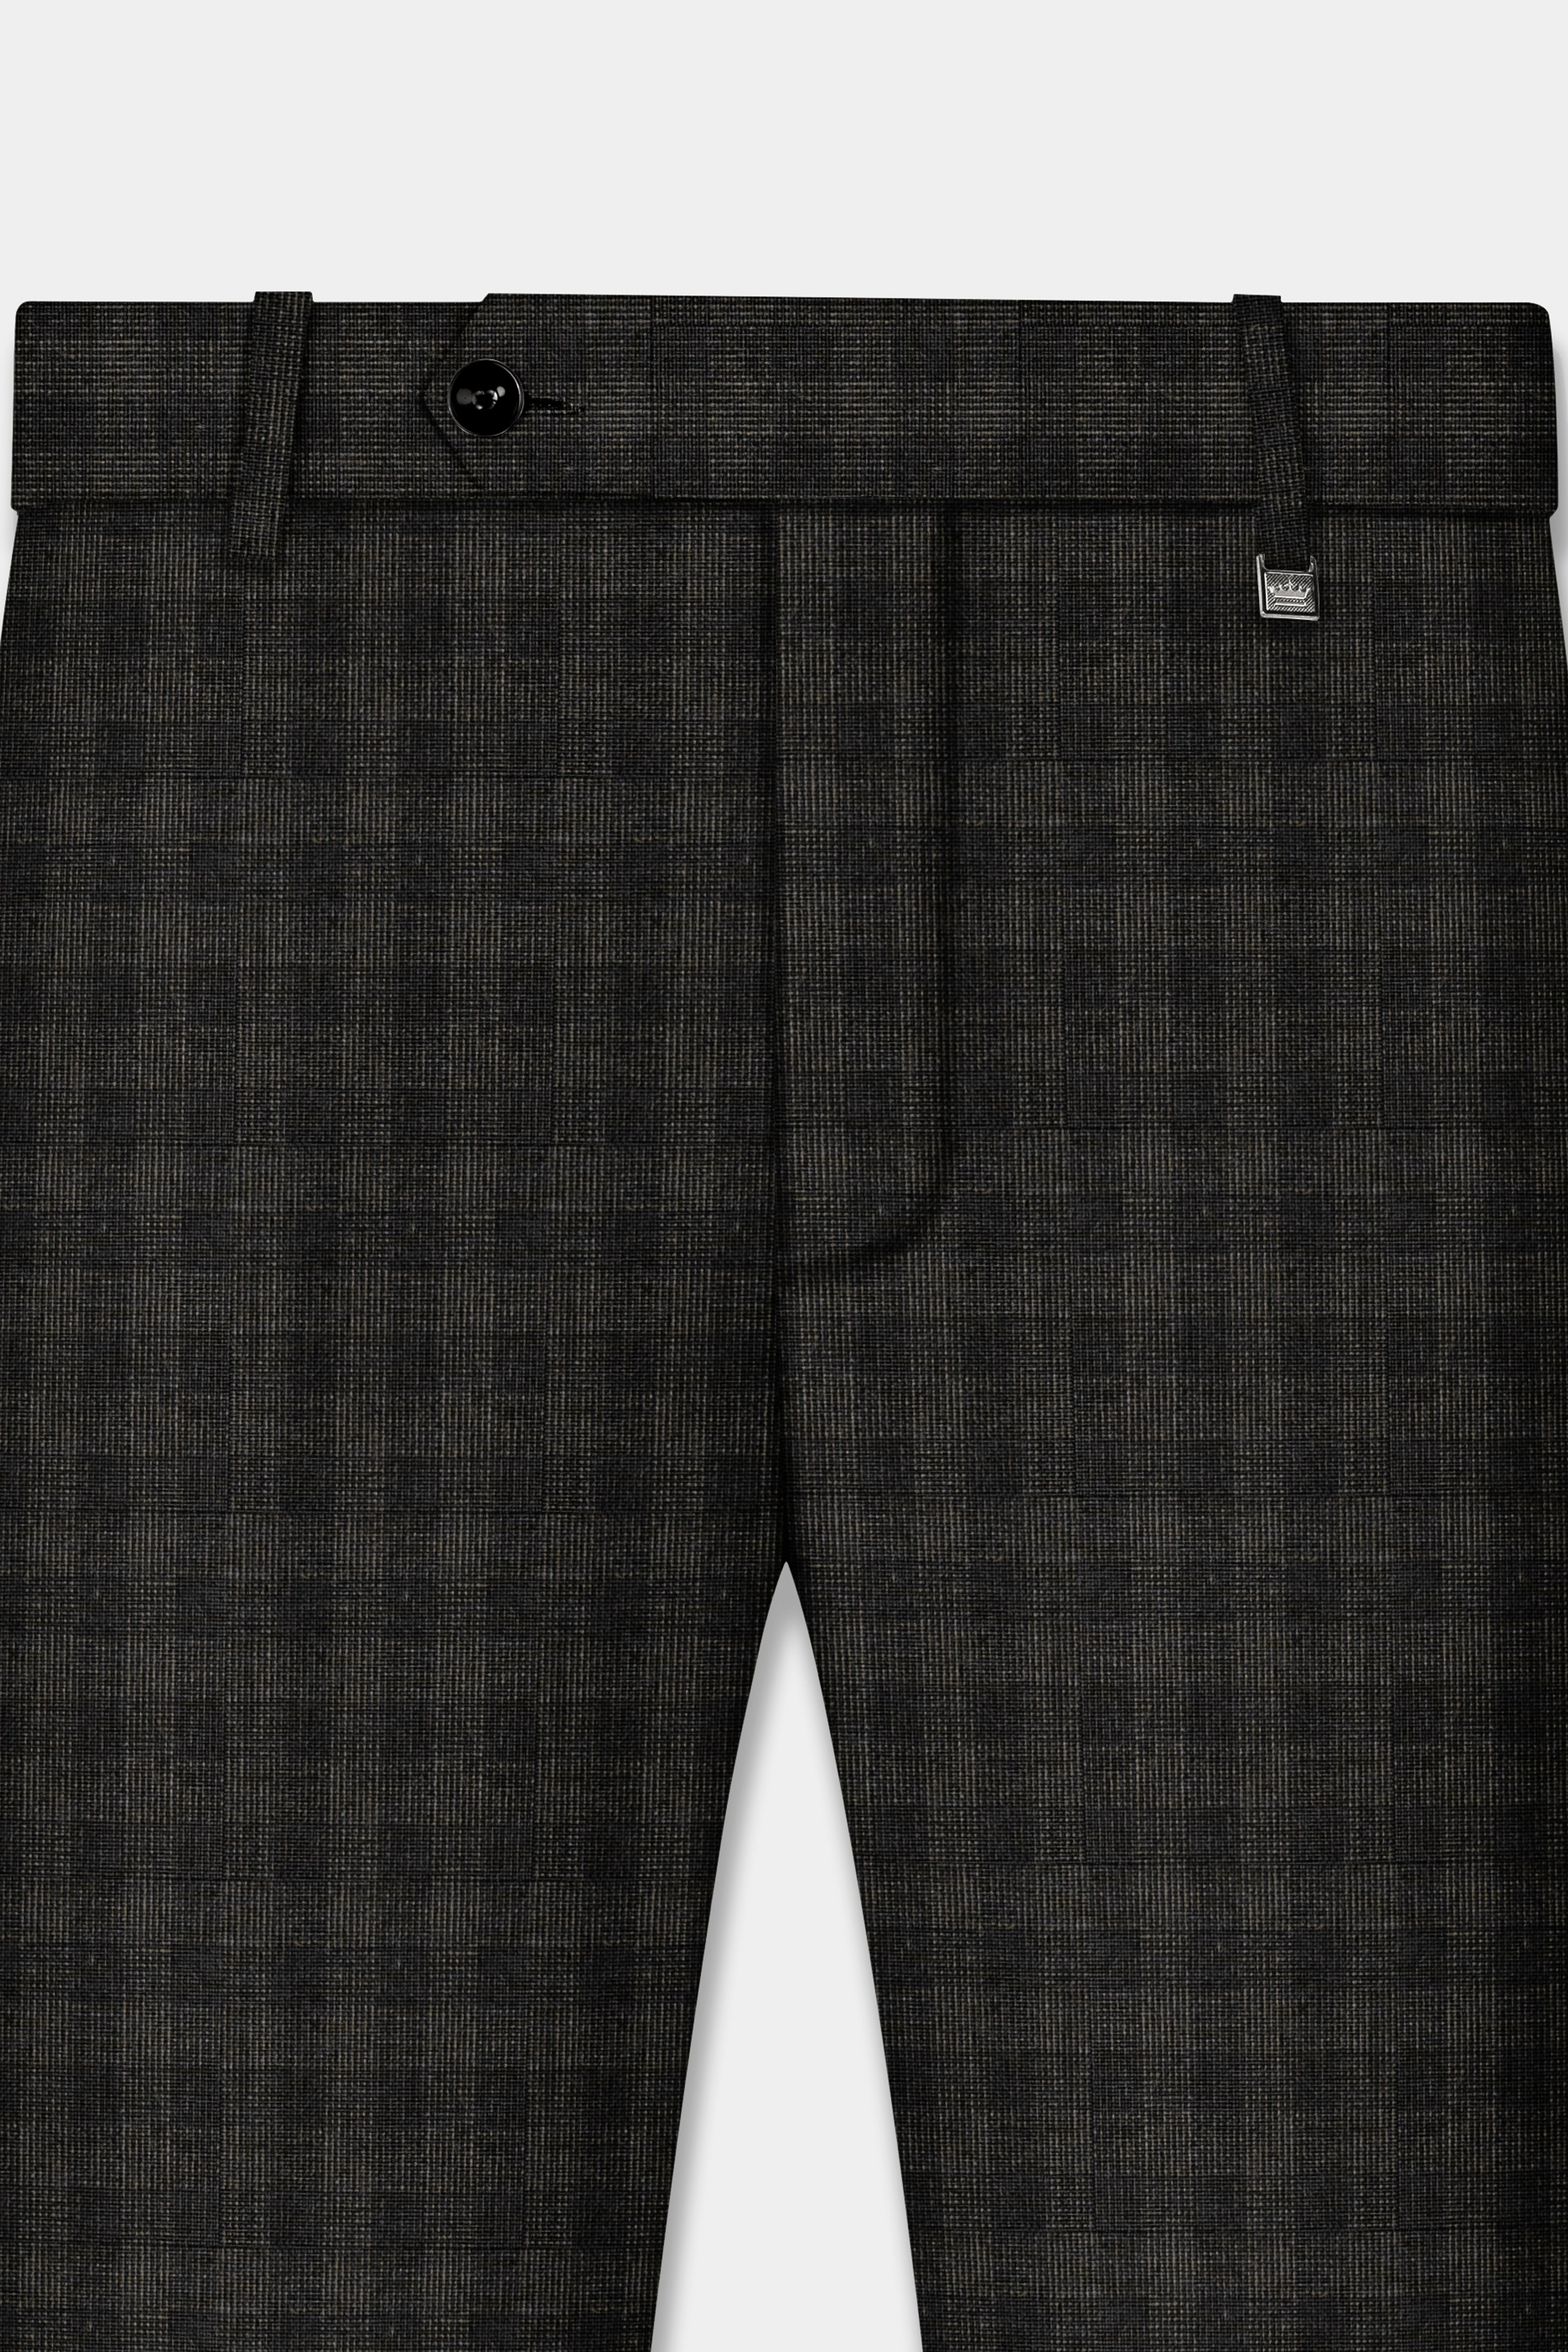 Thunder Gray Plaid Wool Rich Suit